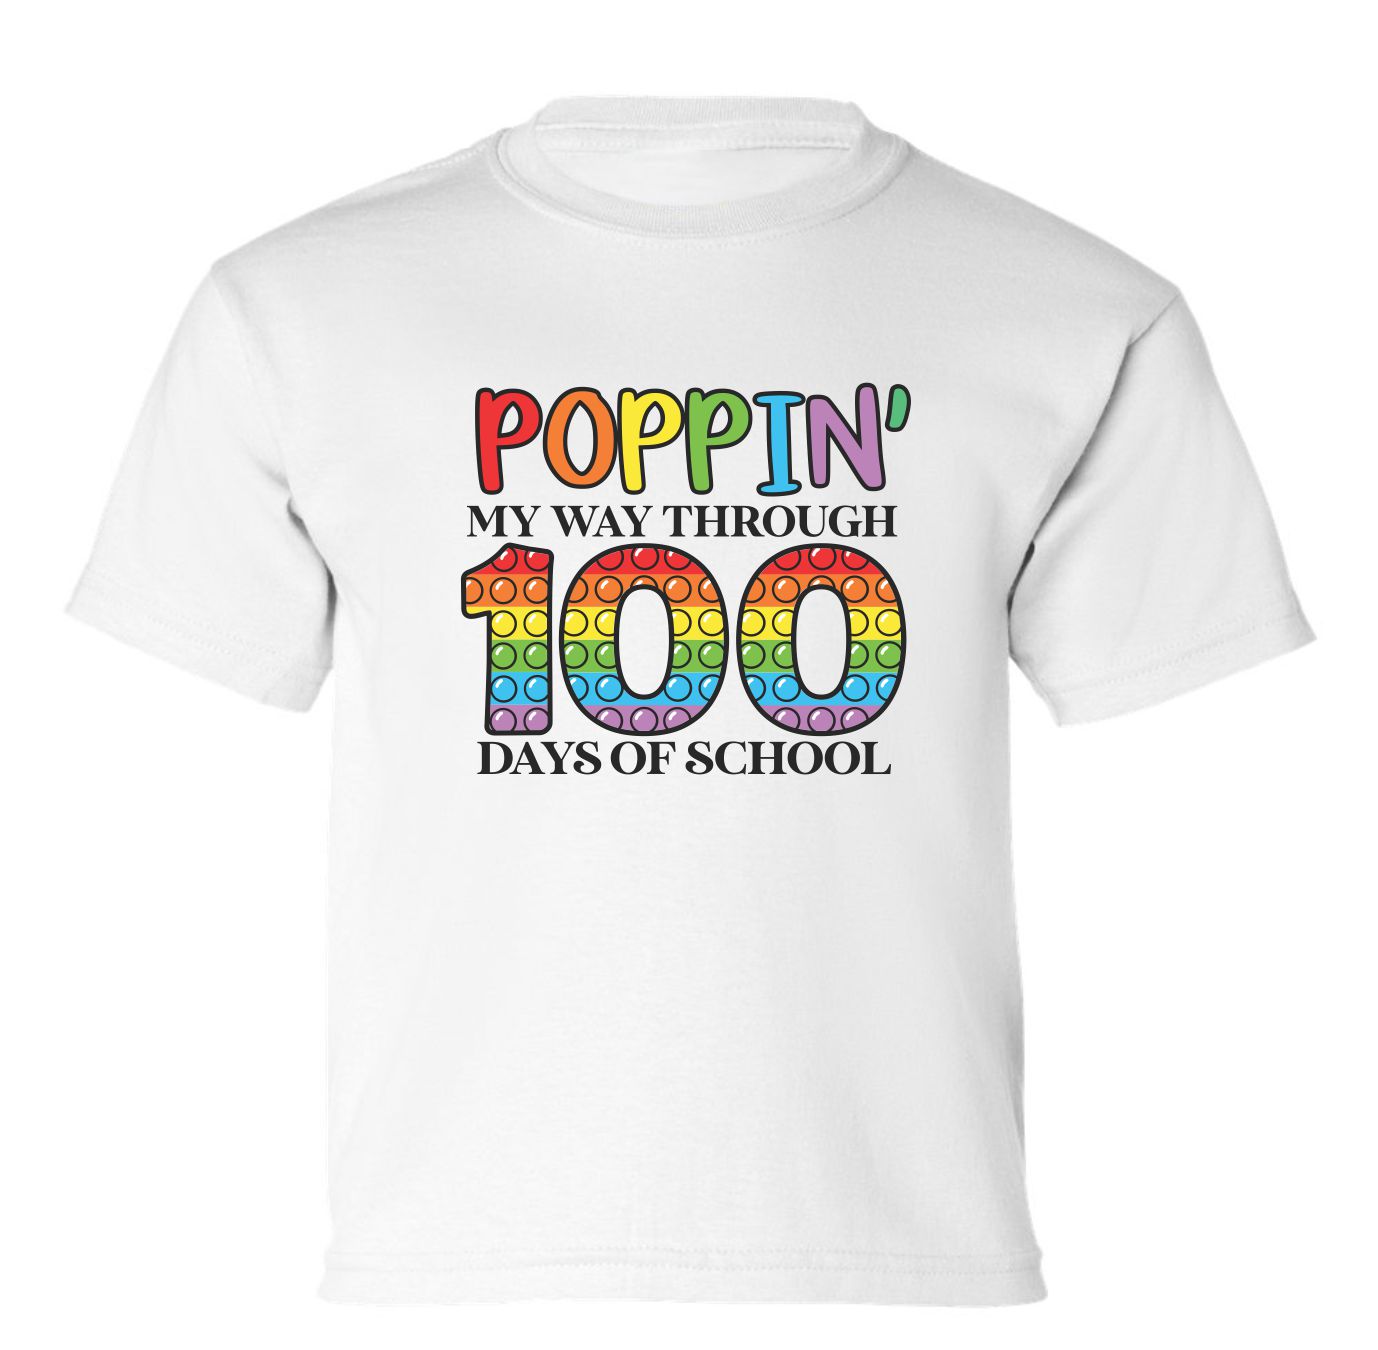 "Poppin' My Way Through 100 Days Of School" Toddler/Youth T-Shirt